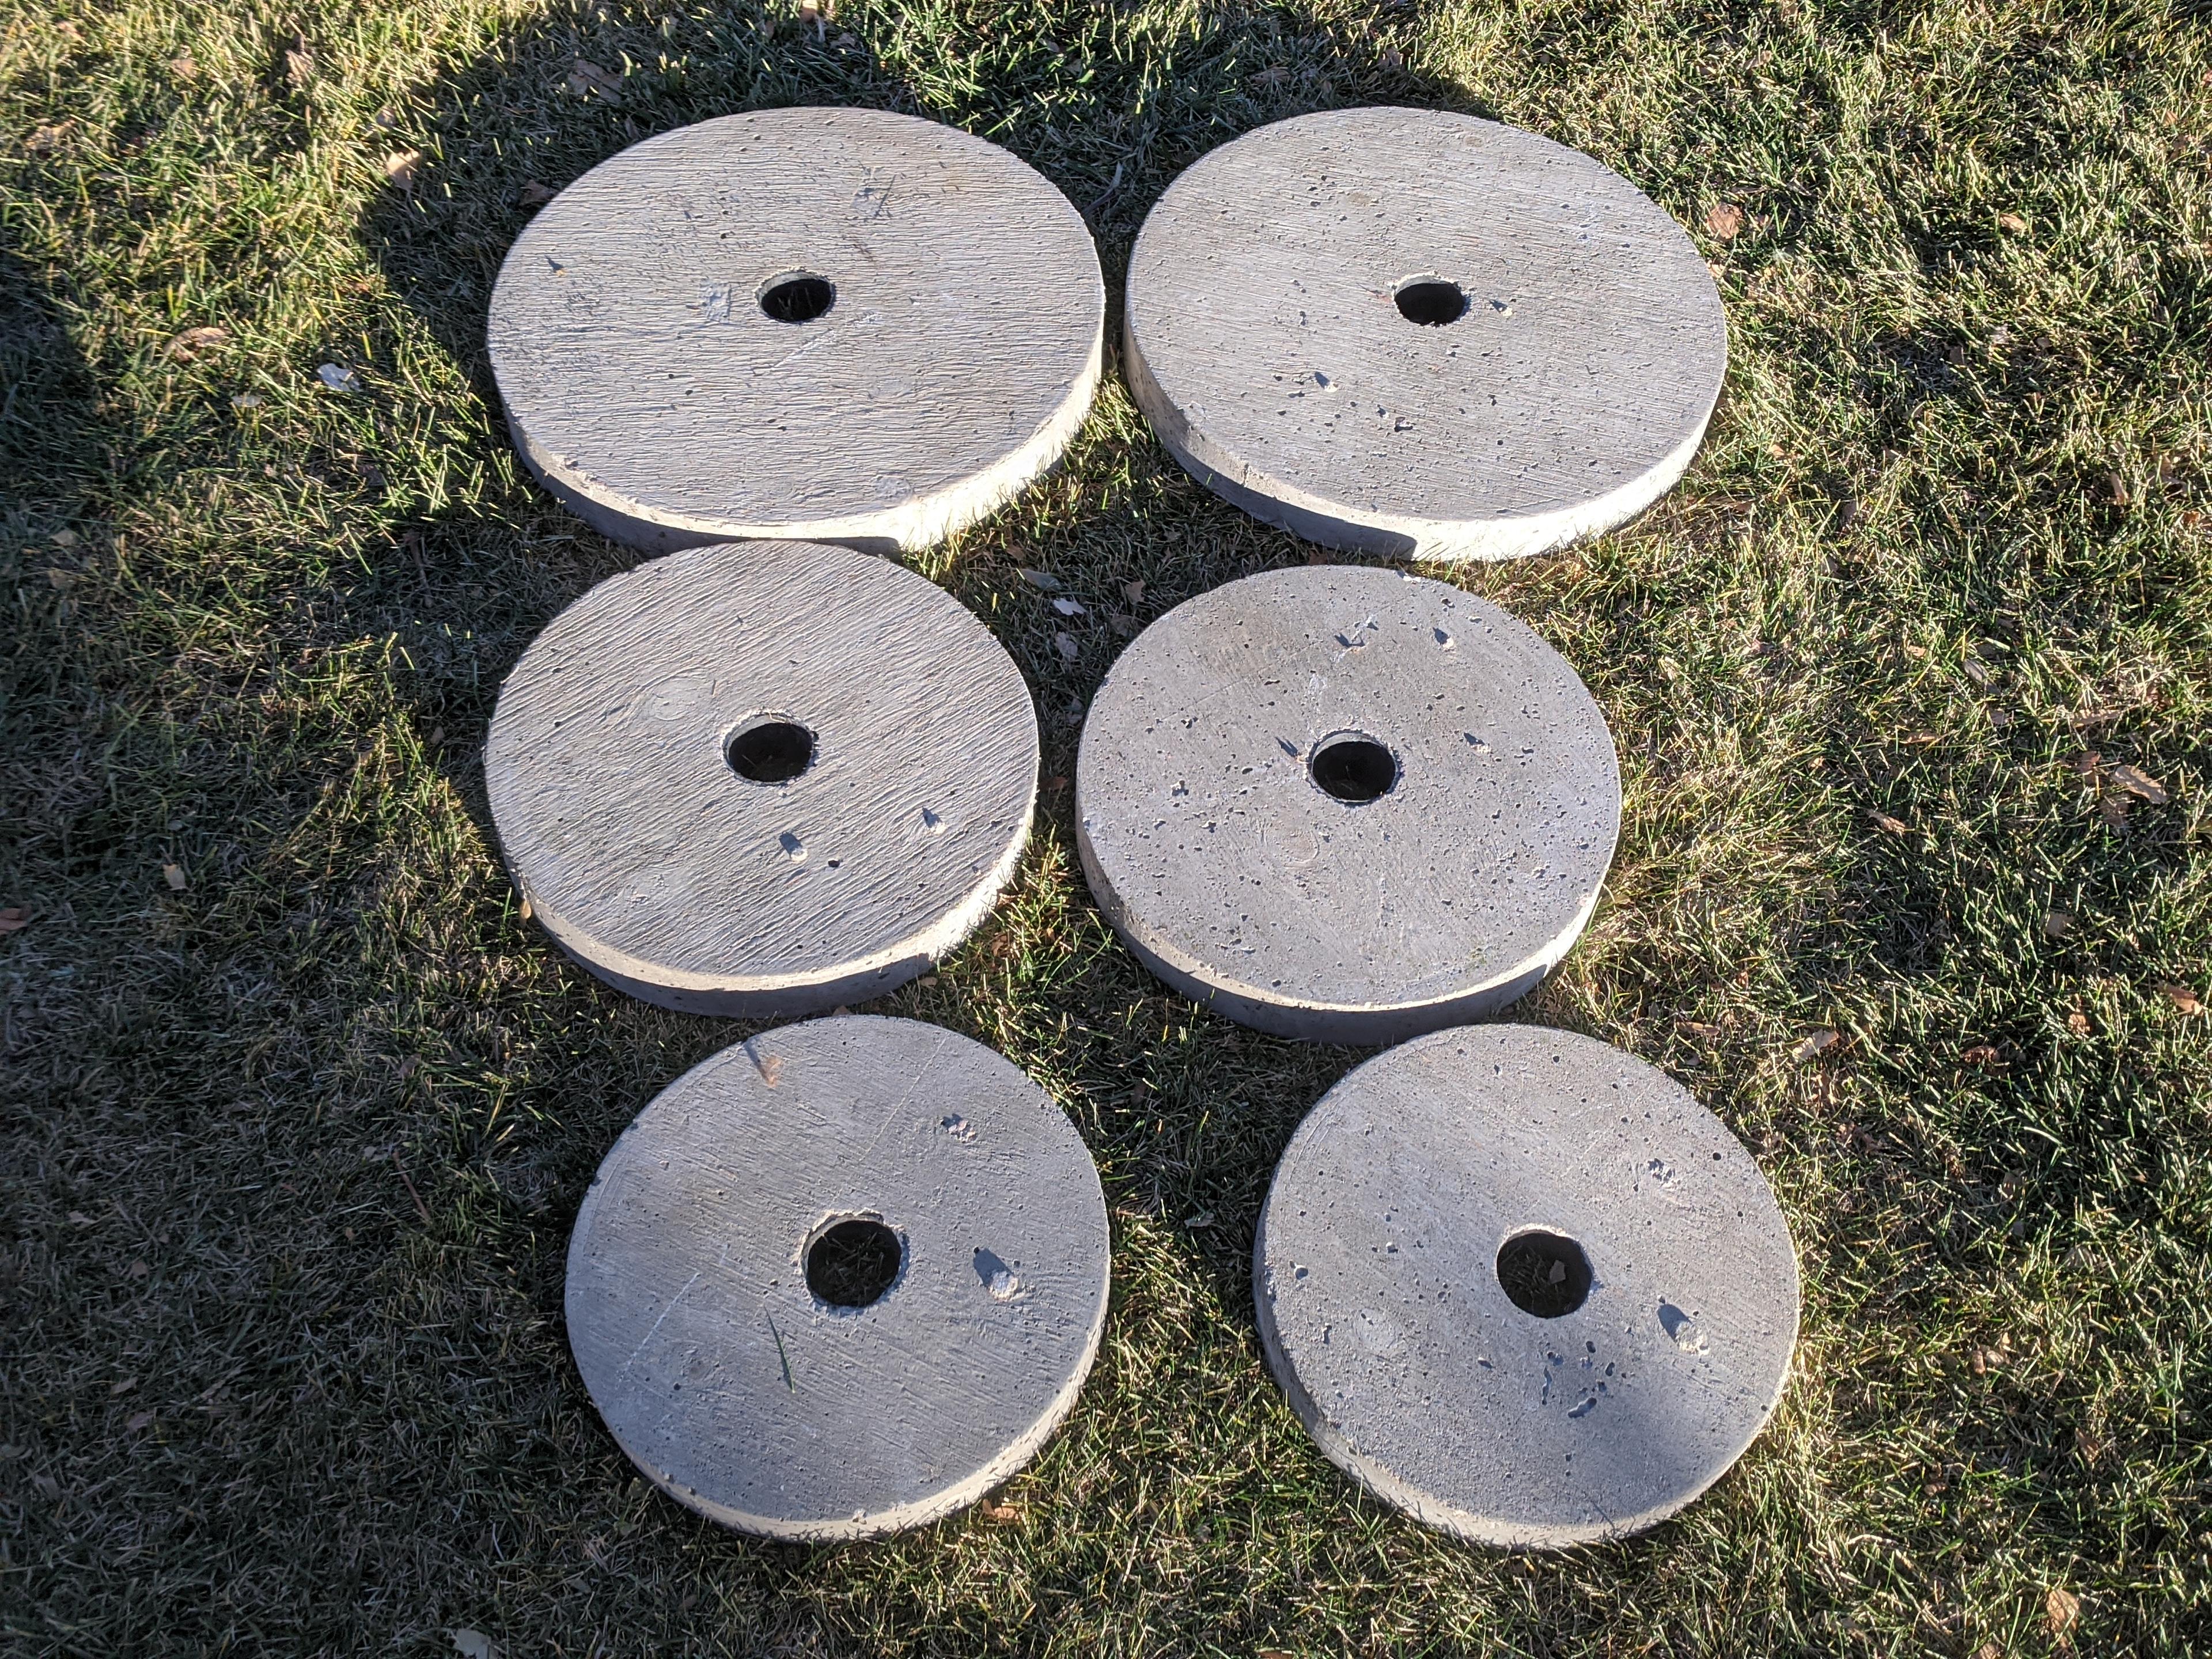 V2 Imperial LB concrete weight molds for homegym and garage gym Olympic or standard DIY 3d model